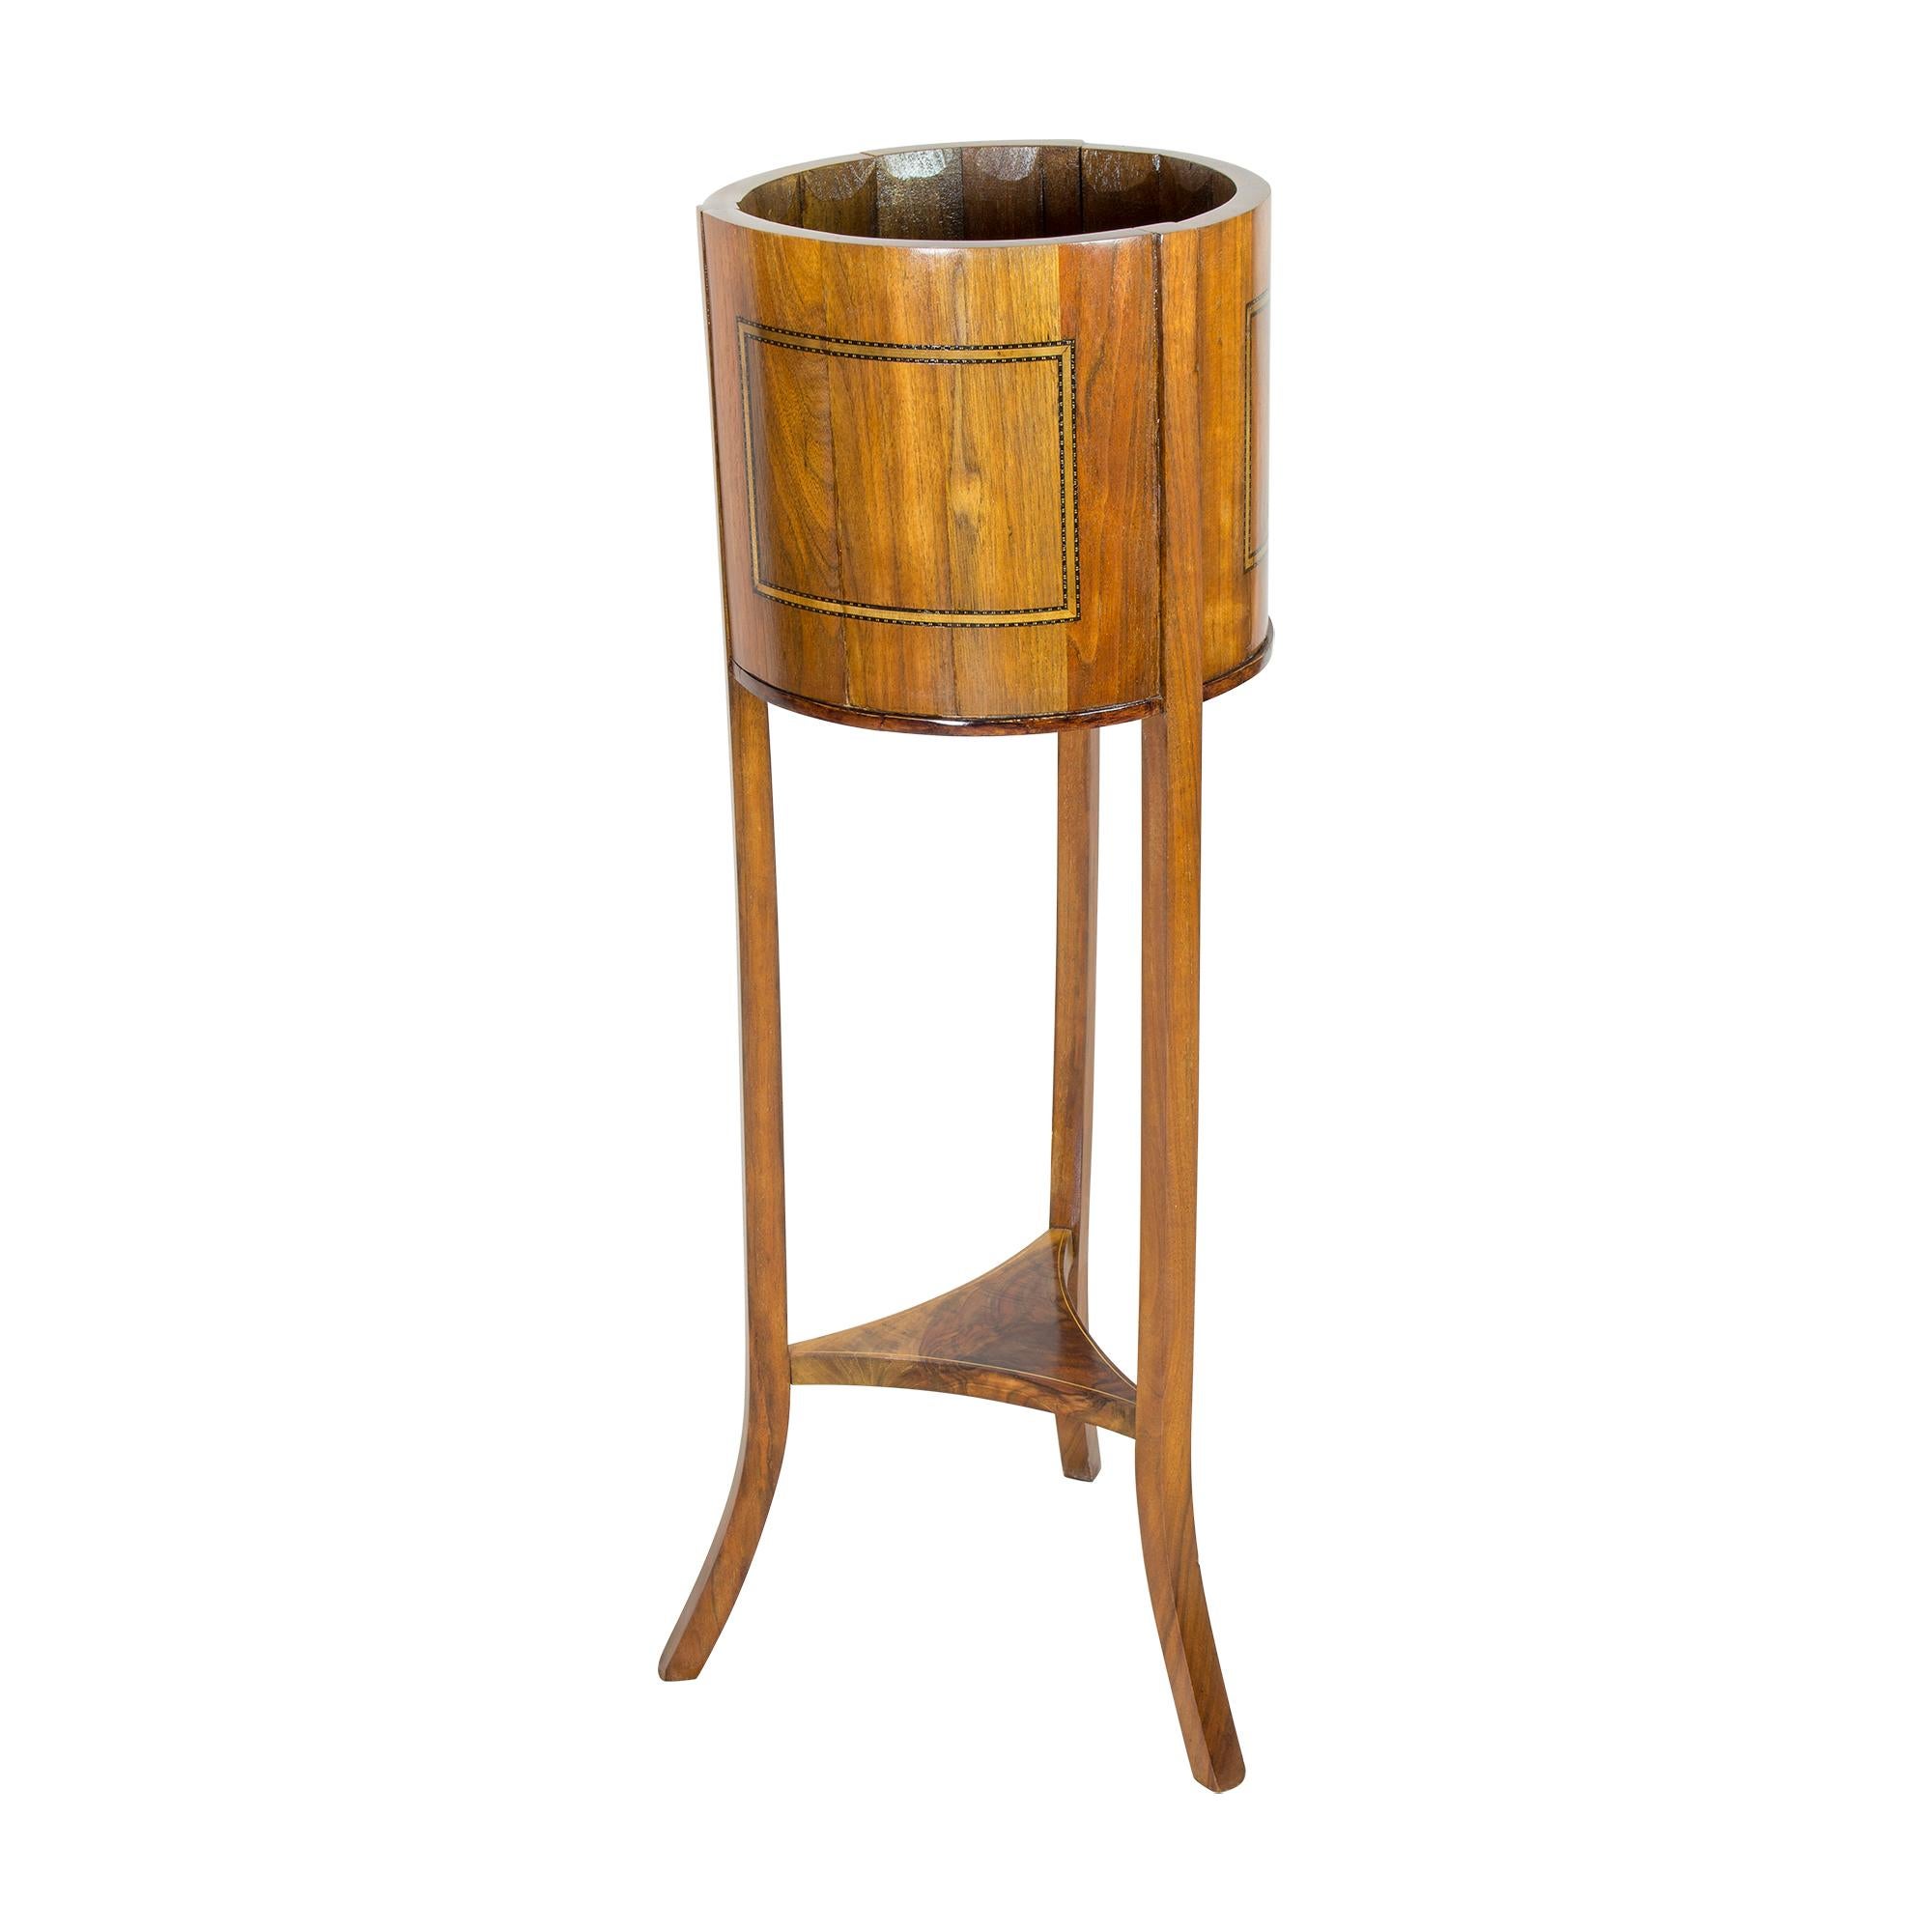 This antique piece of furniture is a truly remarkable and unique example of Biedermeier style, made from beautiful and durable walnut wood. The elegant and understated design of this piece, which can be used as either a flower stand or a wine and